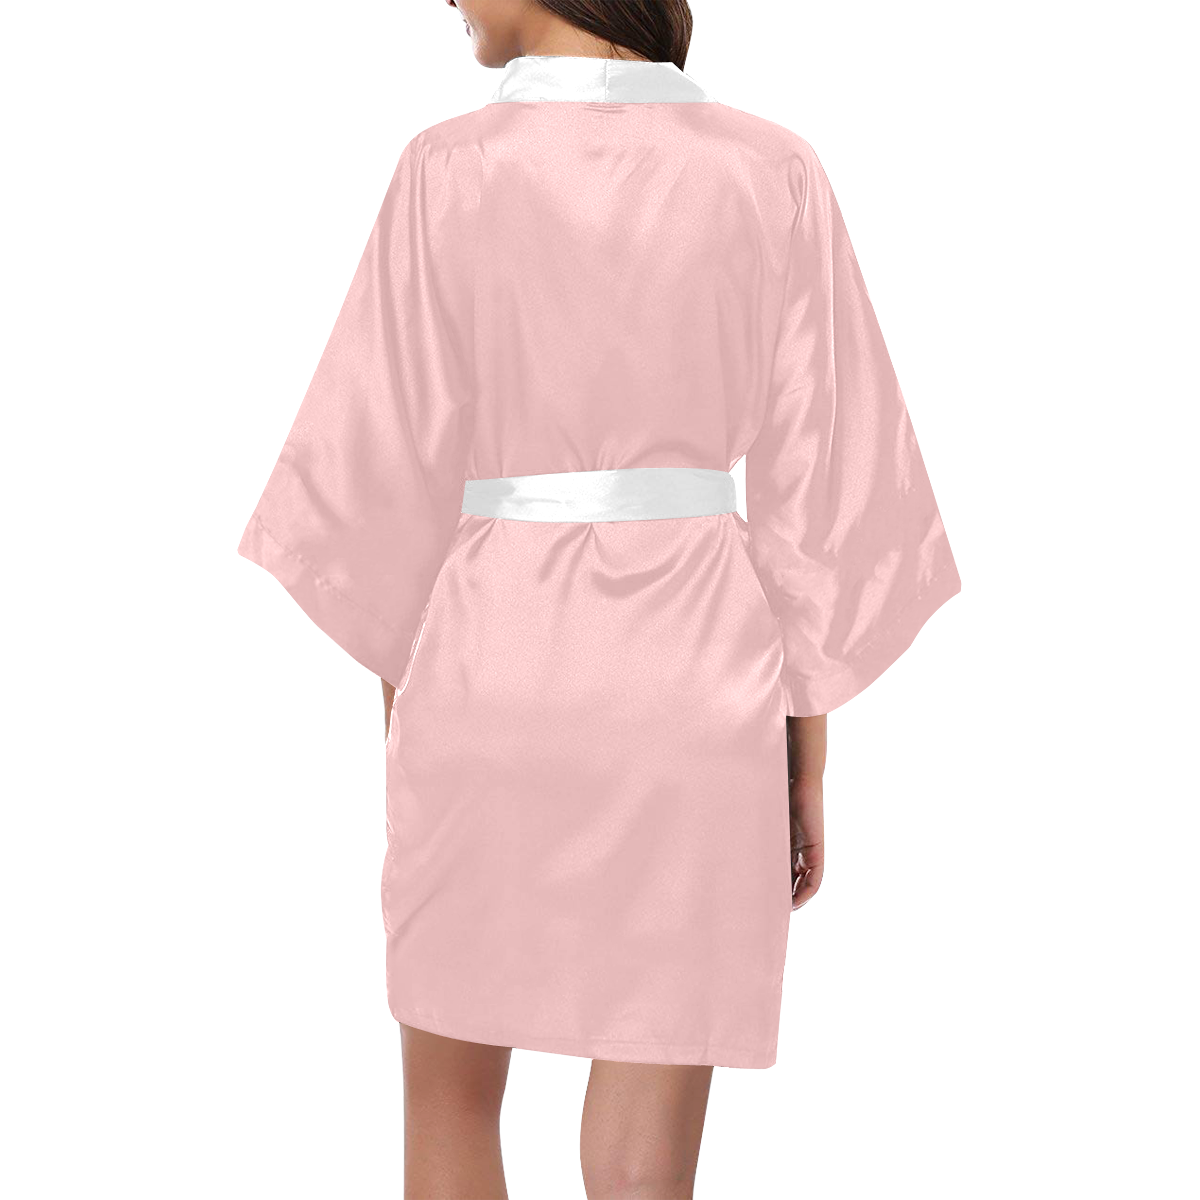 Pastel Carnation Flowers  Pink Solid Color Kimono Robe